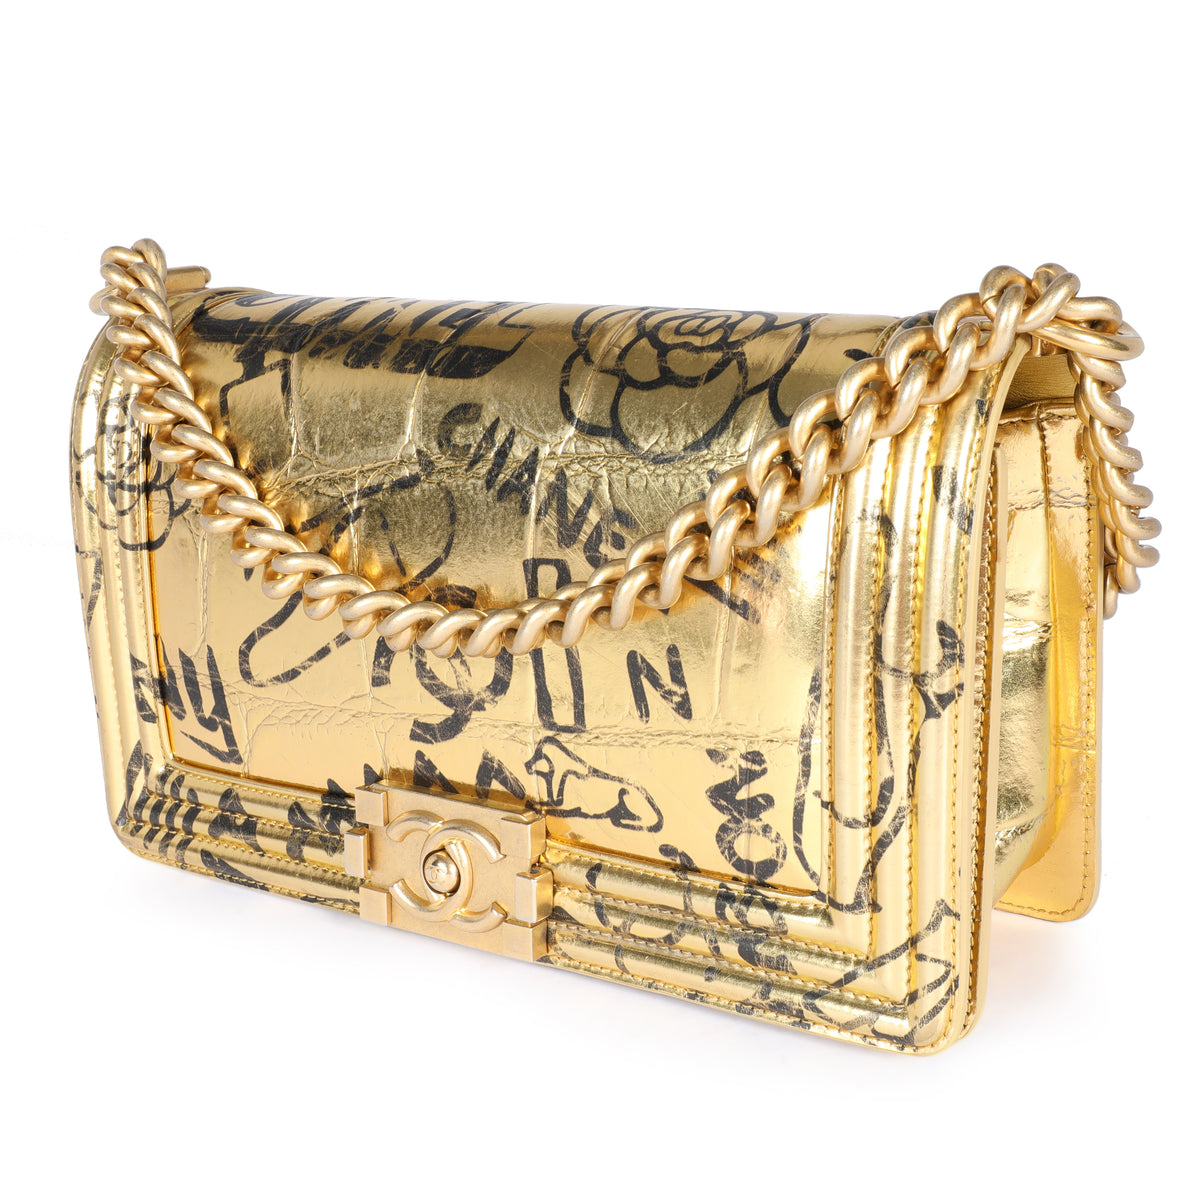 Chanel - Authenticated Boy Handbag - Patent Leather Gold Crocodile for Women, Very Good Condition